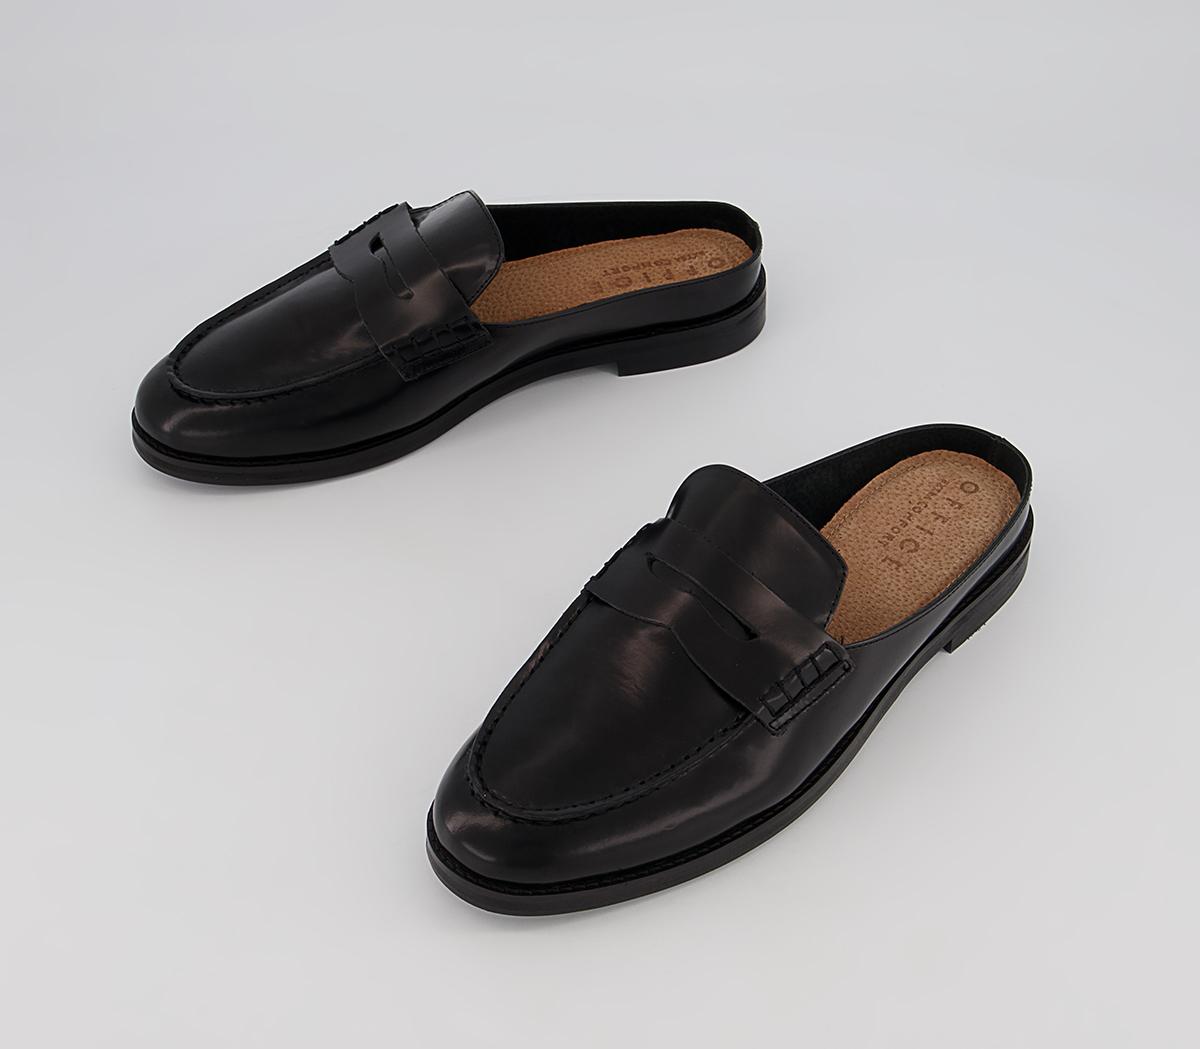 OFFICE Marlow Penny Loafer Mules Black High Shine Leather - Men's ...